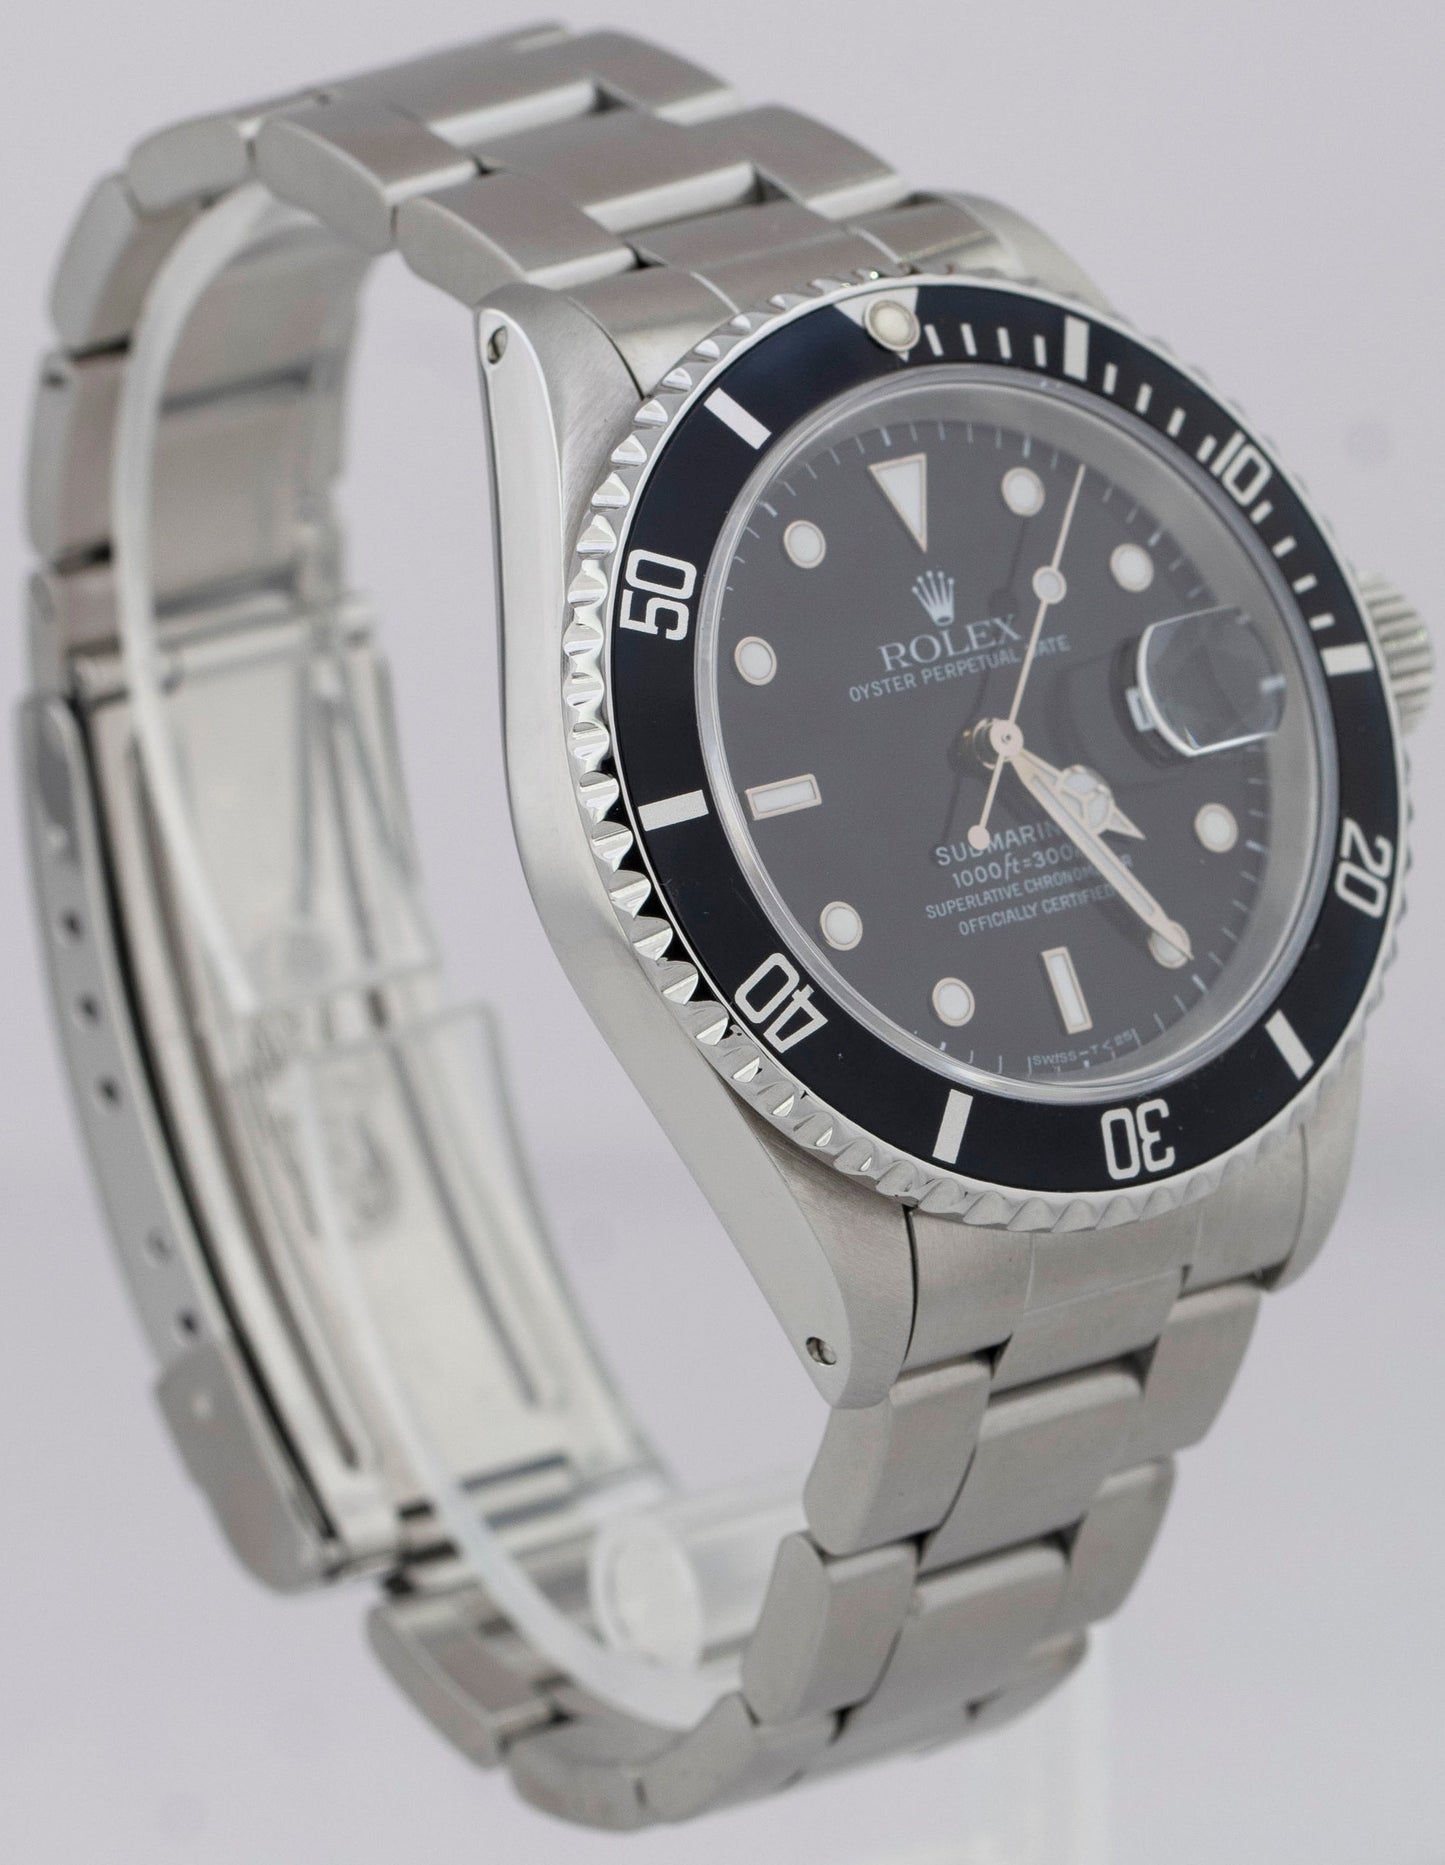 Rolex Submariner Date Stainless Steel Black Automatic Oyster Dive Watch 16610